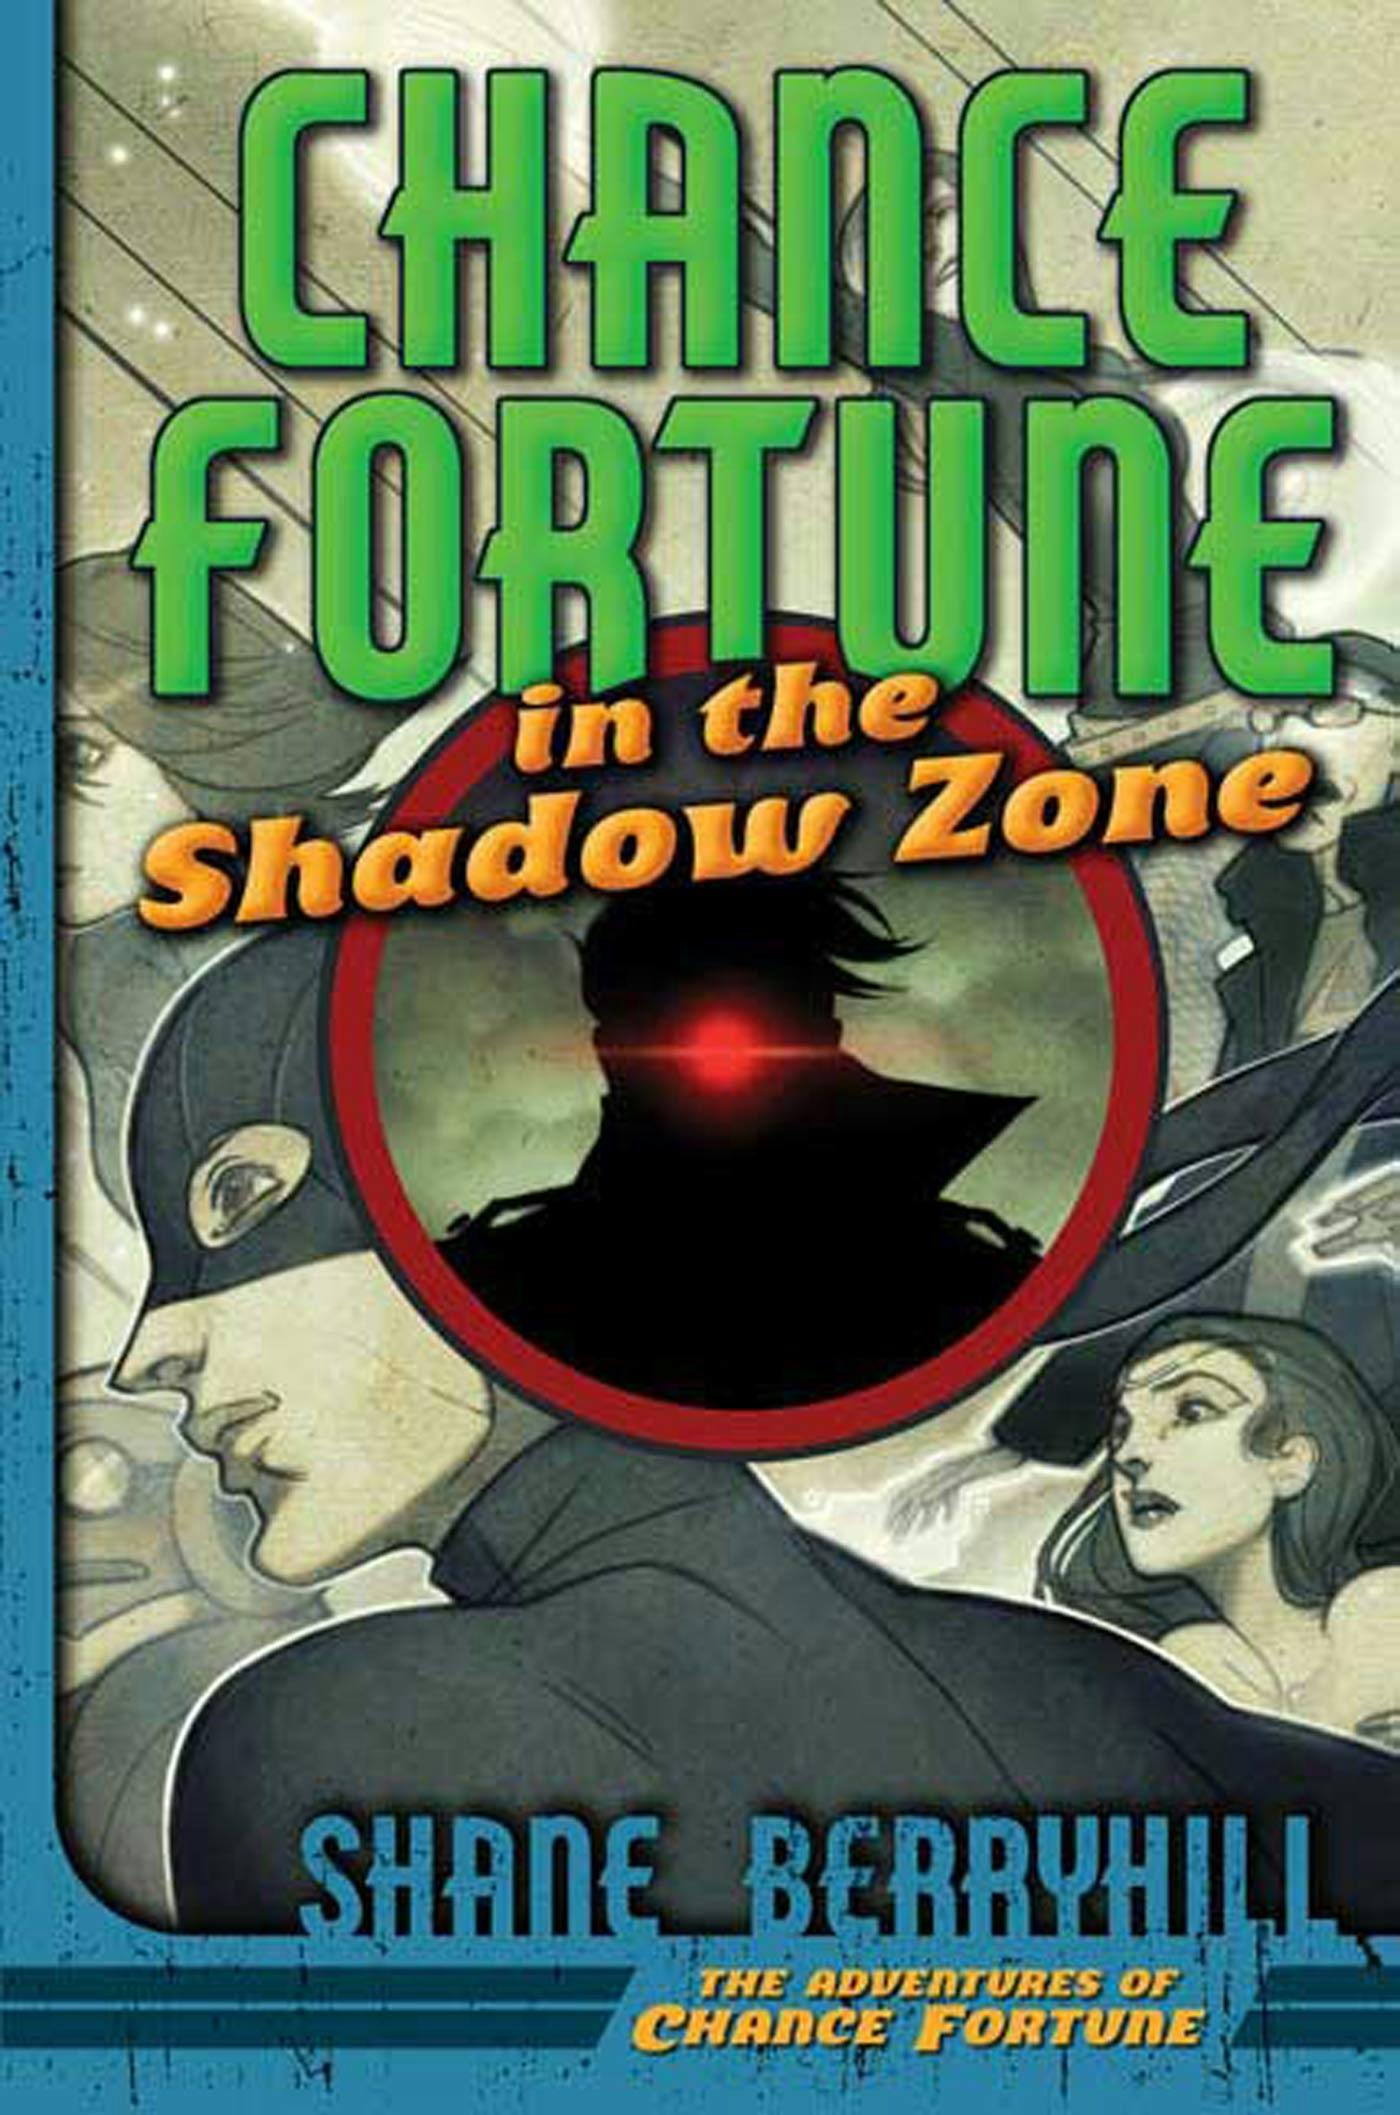 Cover for the book titled as: Chance Fortune in the Shadow Zone